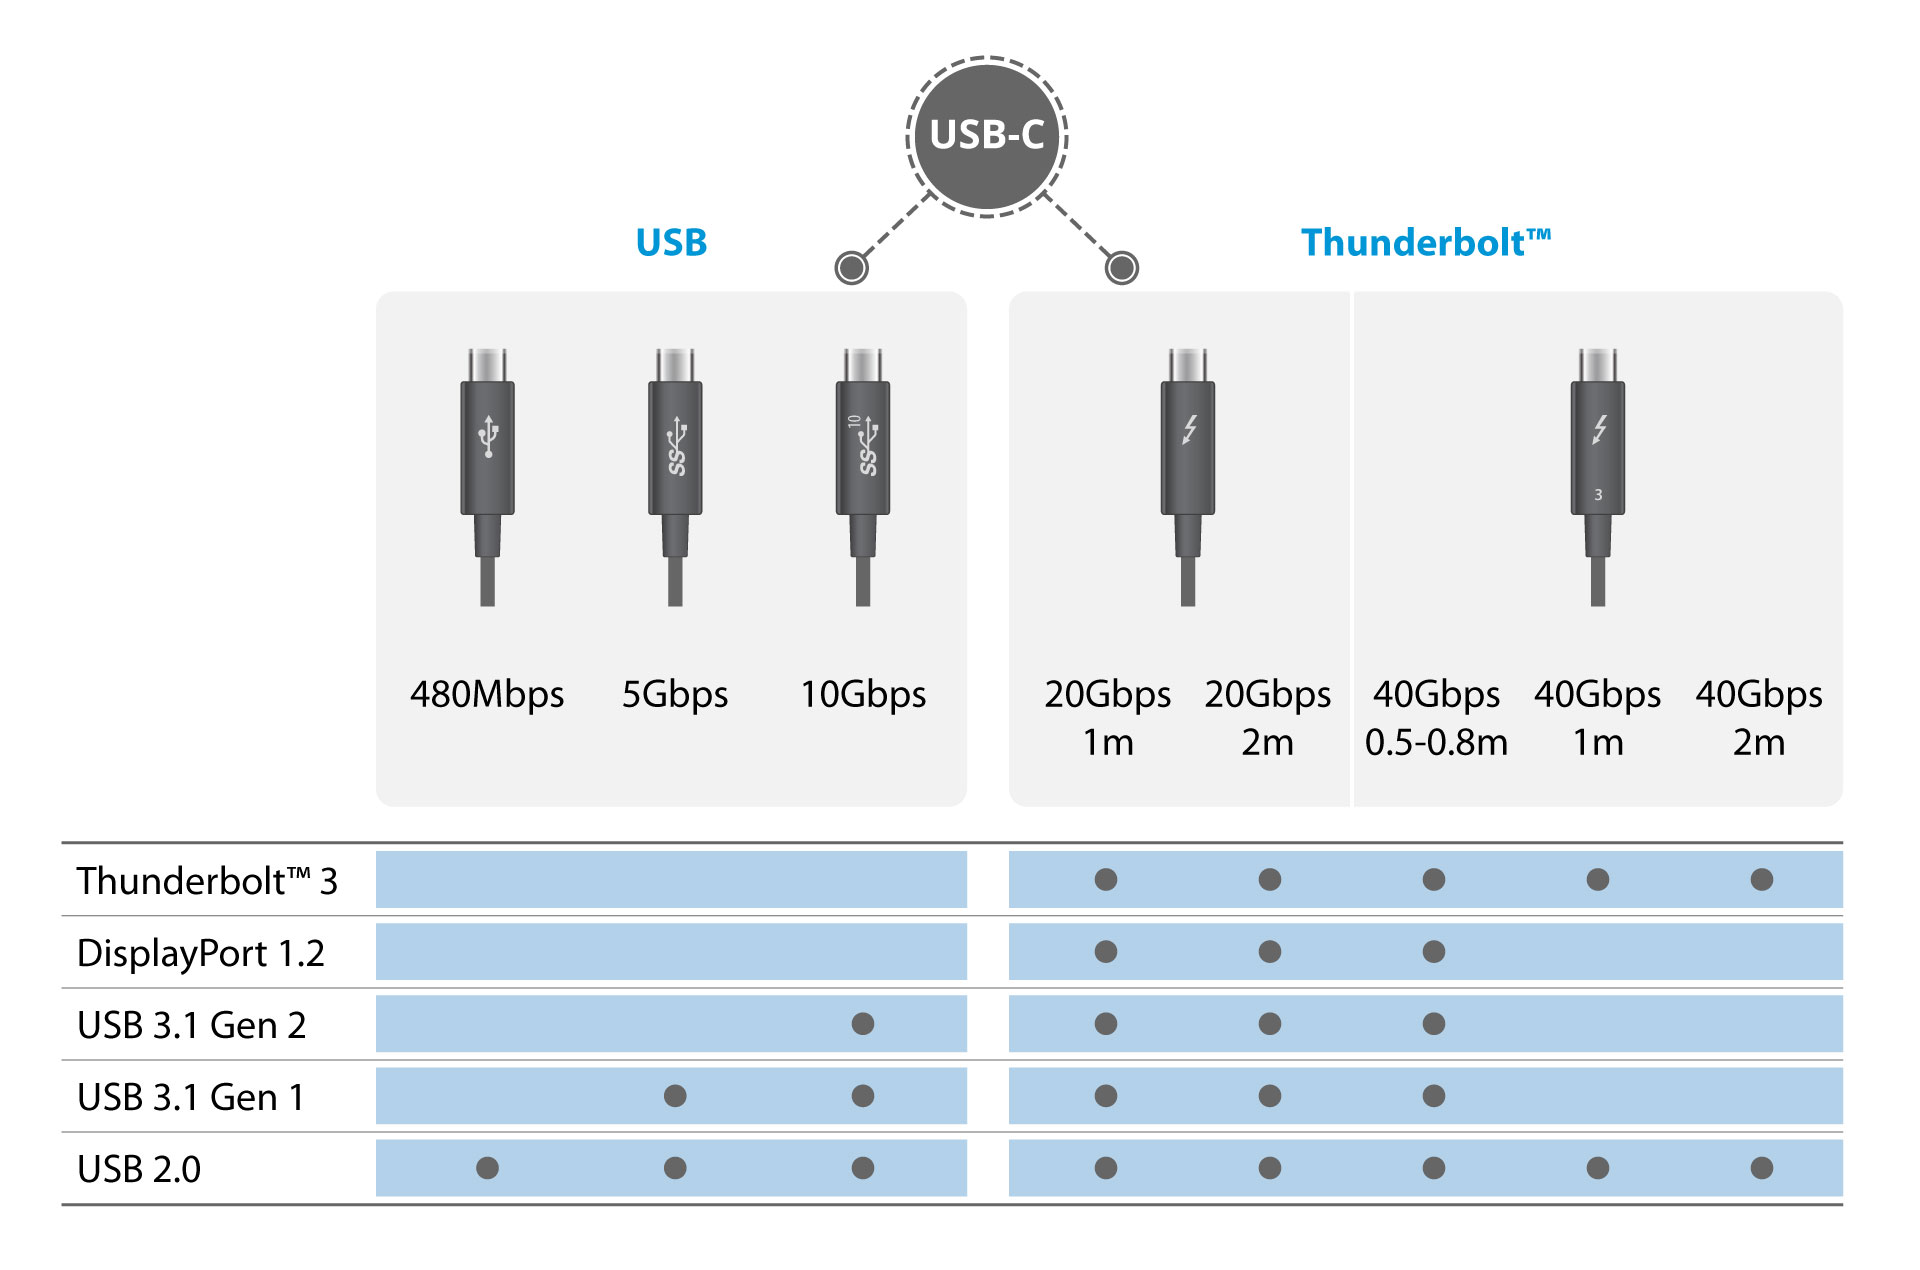 Thunderbolt 3, 4, or USB-C Cable? Which is right choice? | MacRumors Forums